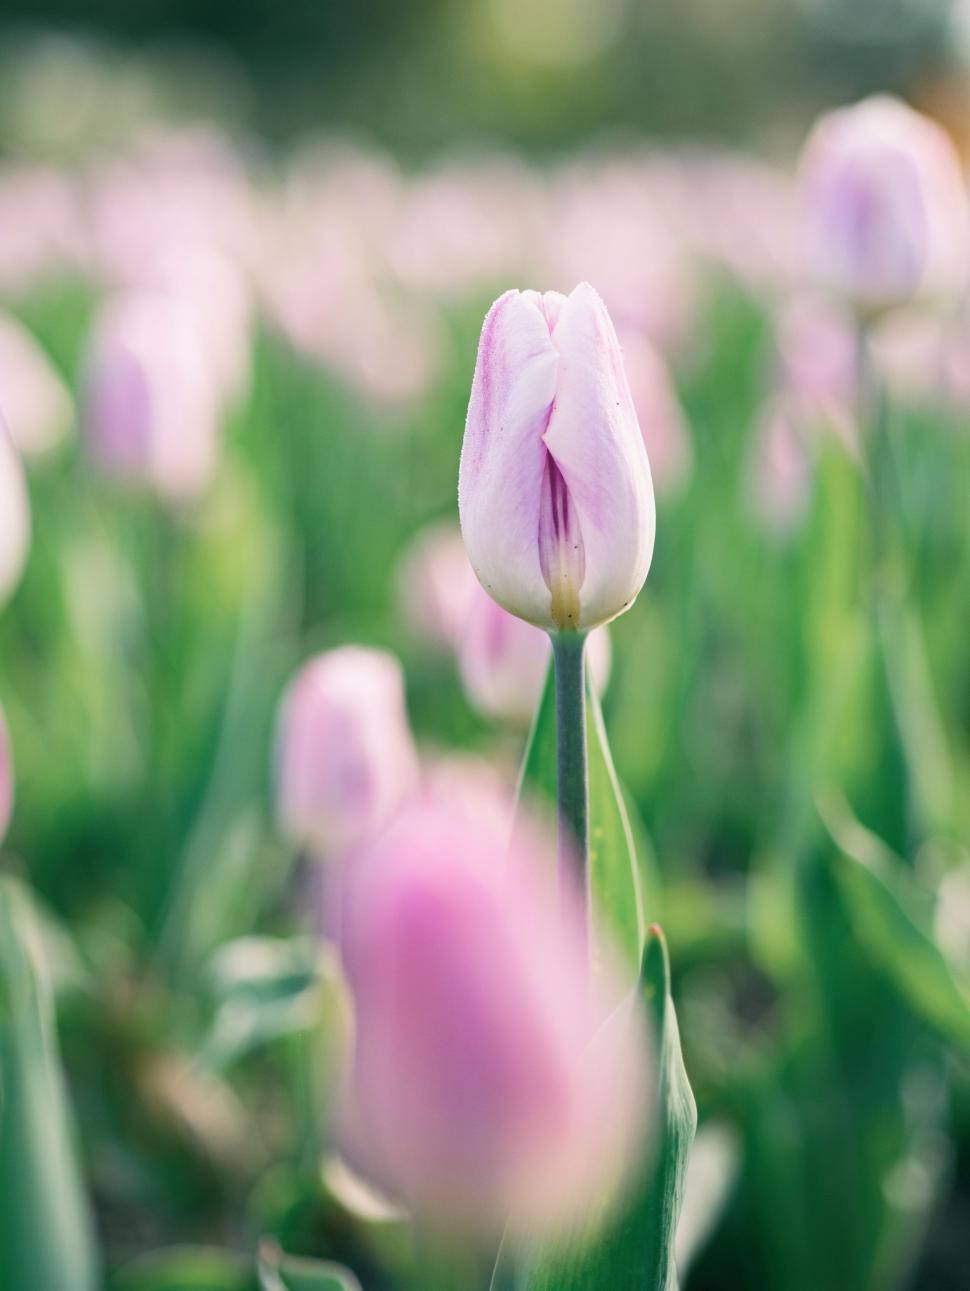 Free Image of tulip flower spring tulips plant garden flowers blossom floral flora bloom bud petal field holland dutch leaf colorful bouquet pink blooming season stem color yellow seasonal netherlands fresh vibrant bunch summer bright 